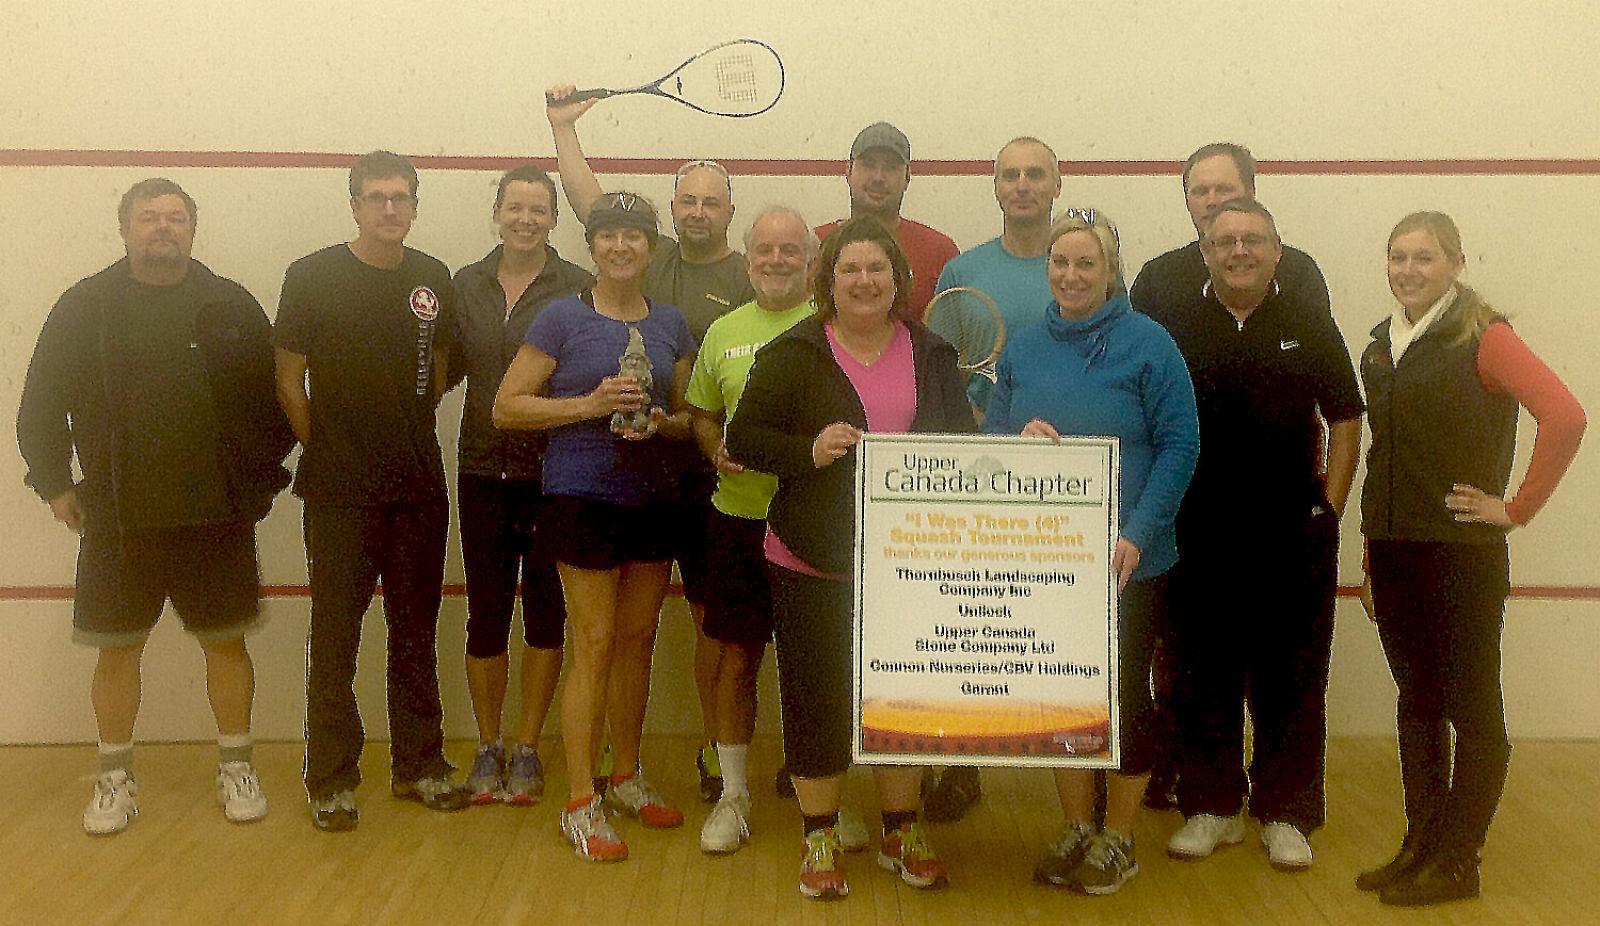 Good times, good food and good squash were the order of the day for all of the participants at 4th Annual ‘I Was There’ squash event in Trenton.